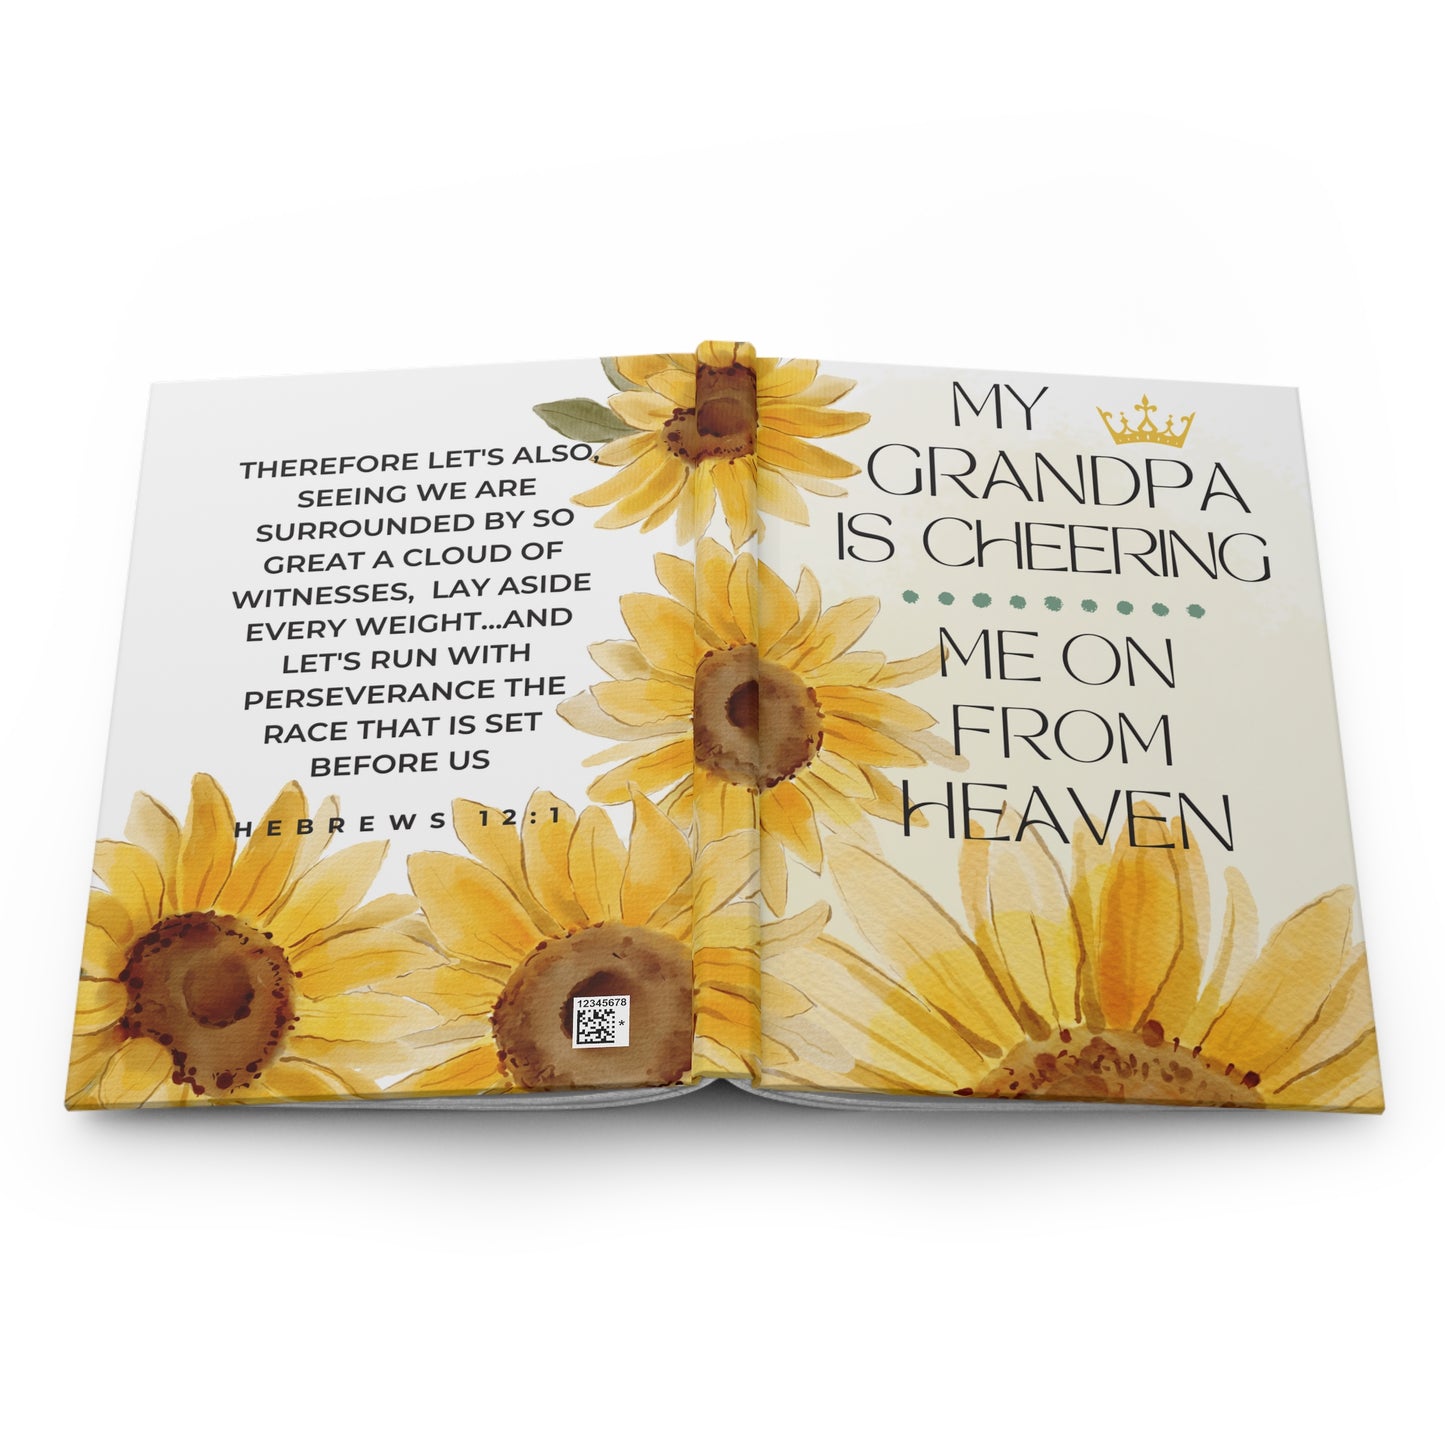 Grief Journal for Loss of Grandpa, Cheering Me On From Heaven